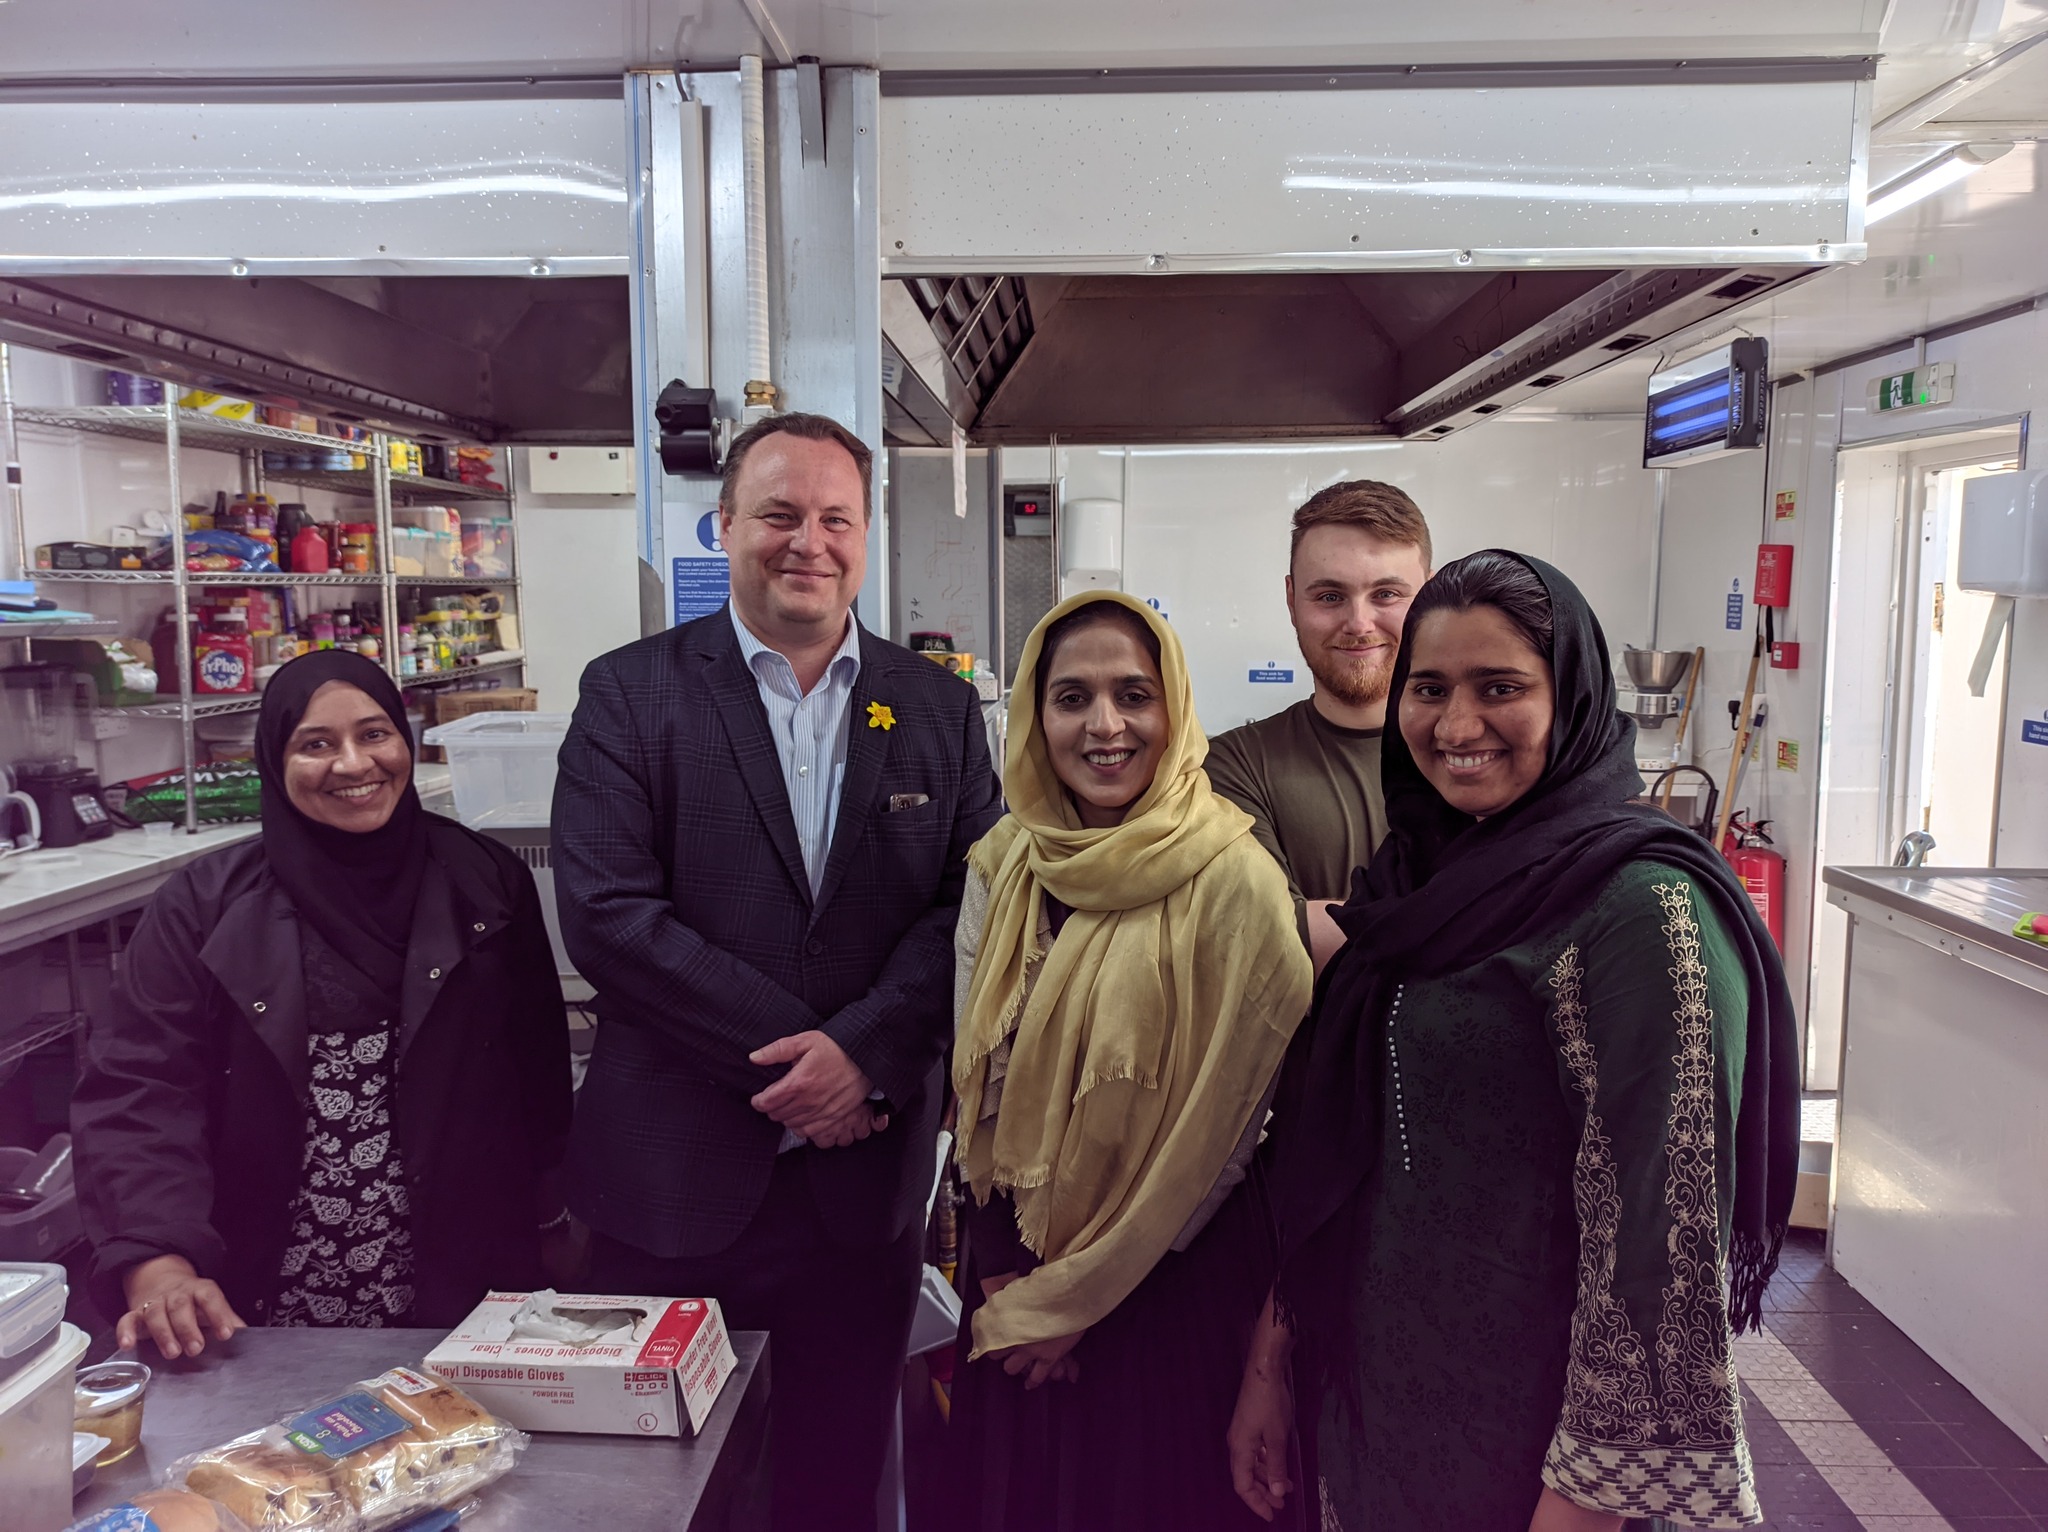 Chris Stephens MP visits the Crookston Community Group, at Tiffin in Bellahouston, and their final Lunch Club of the summer. Tariq, Nasreen and the whole team provide a fantastic service to the community with their ever expanding services.